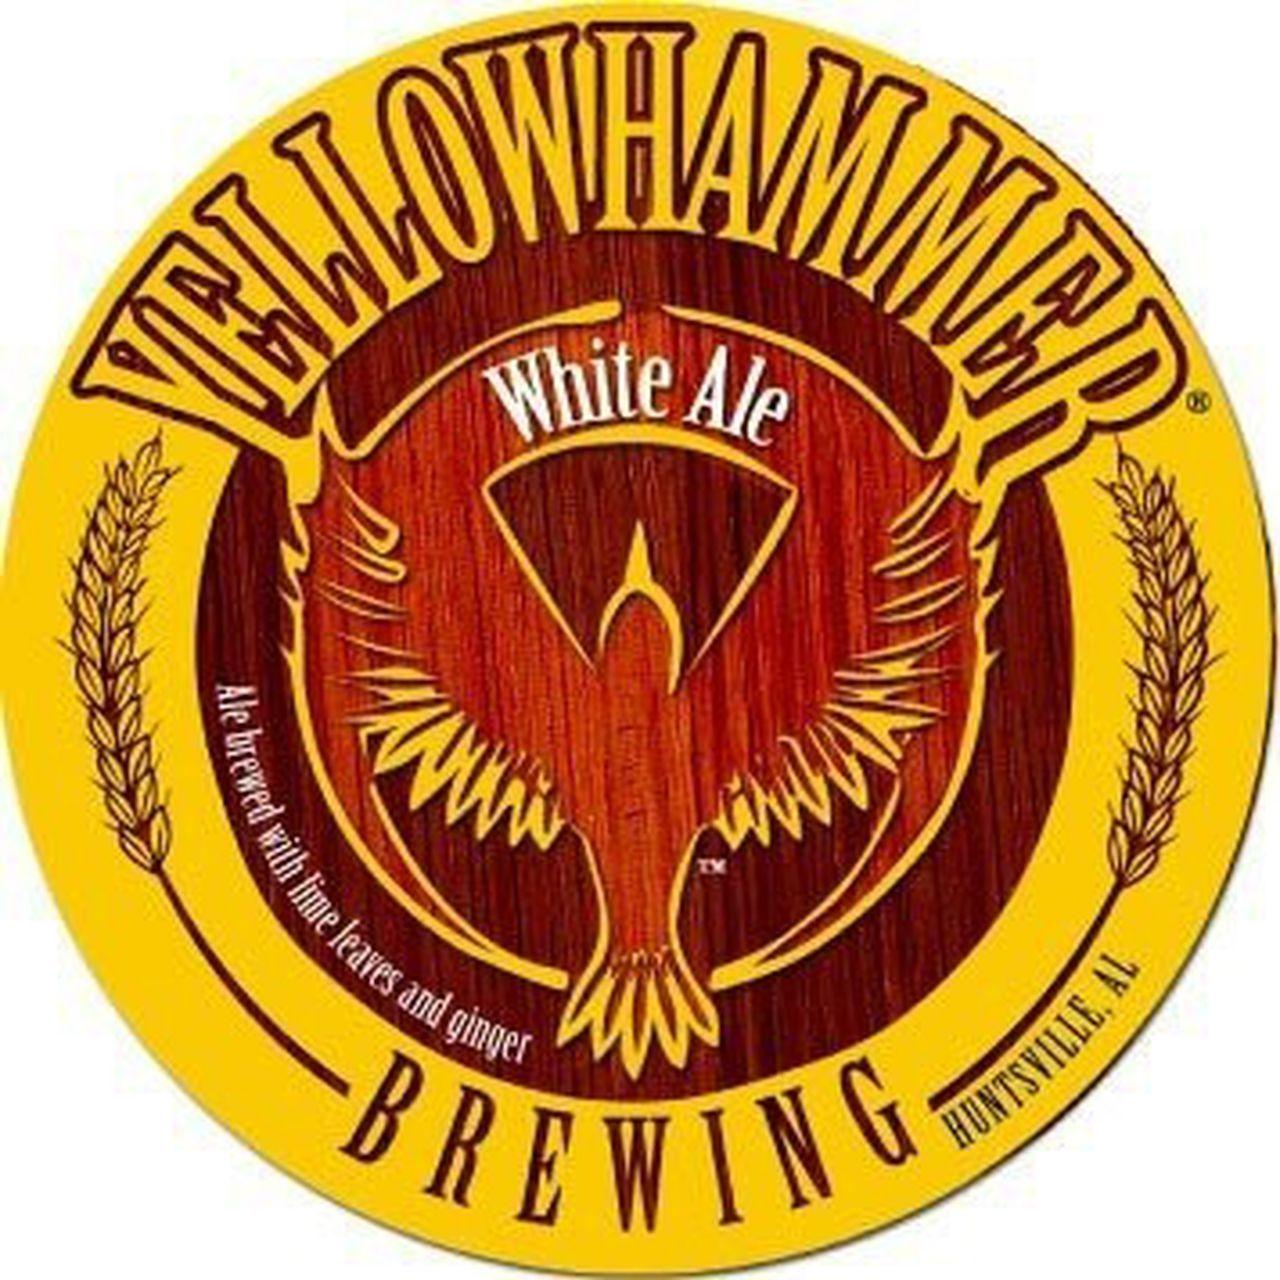 Yellowhammer Logo - Yellowhammer Brewing to host food truck for the first-time this time ...